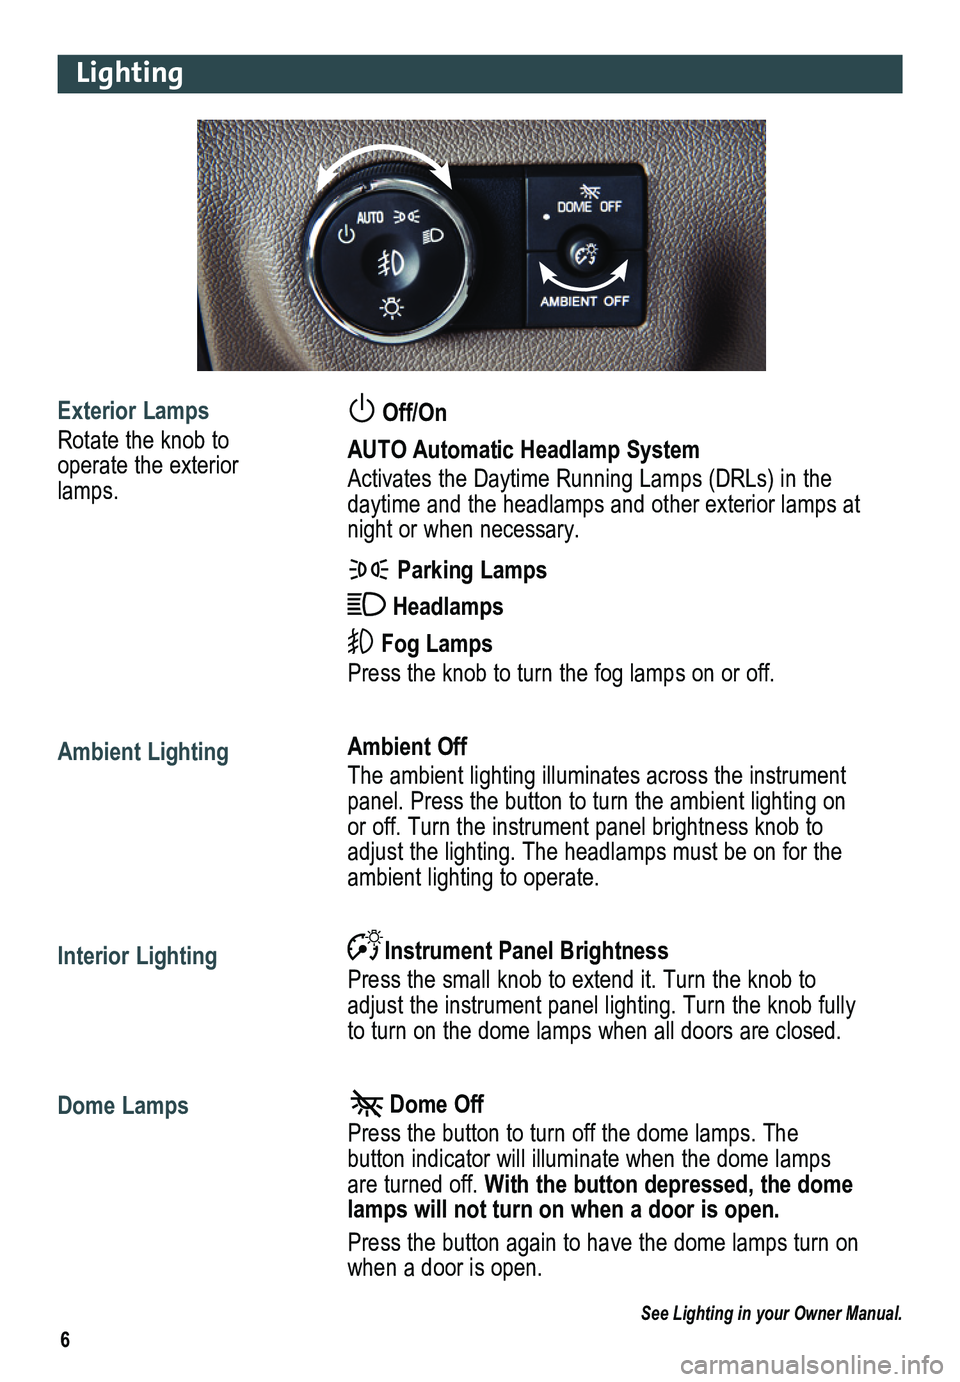 GMC ACADIA 2014  Get To Know Guide 6
Lighting
Exterior Lamps
Rotate the knob to operate the exterior lamps.
 
Ambient Lighting
 
Interior Lighting
Dome Lamps
 
 Off/On 
AUTO Automatic Headlamp System
Activates the Daytime Running Lamps